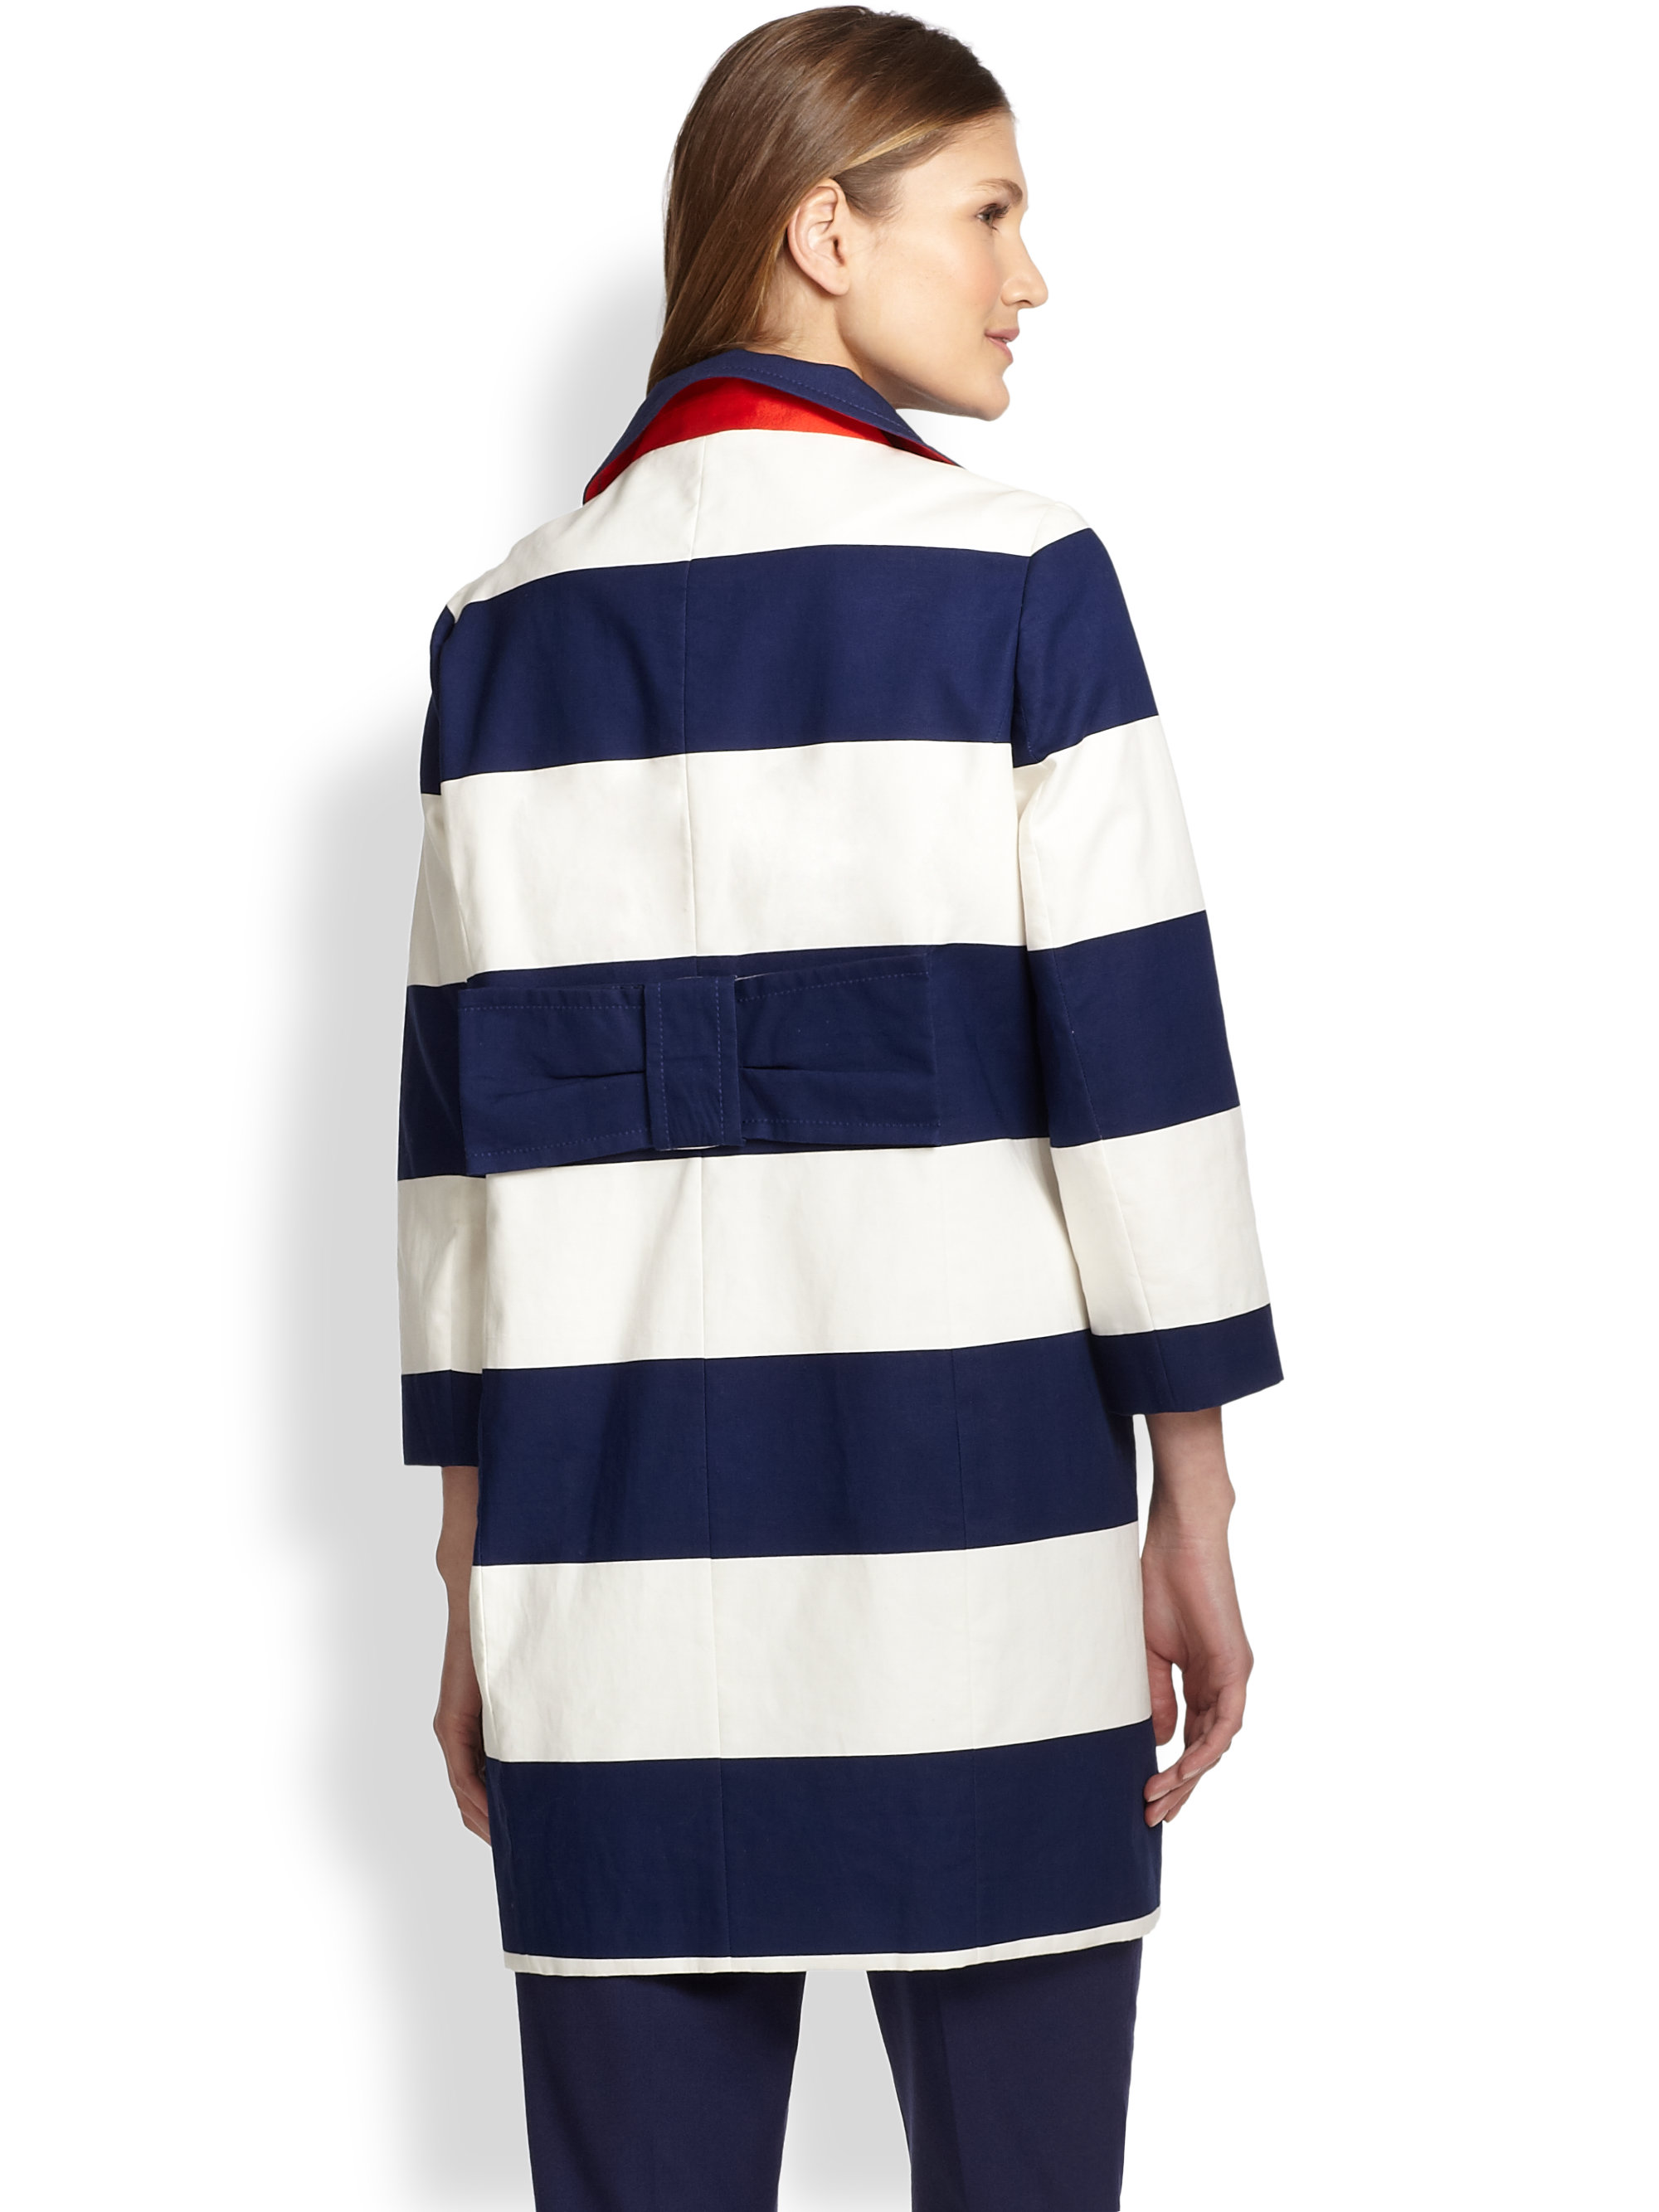 Kate Spade Franny Striped Coat in French Navy-Cream (Blue) - Lyst